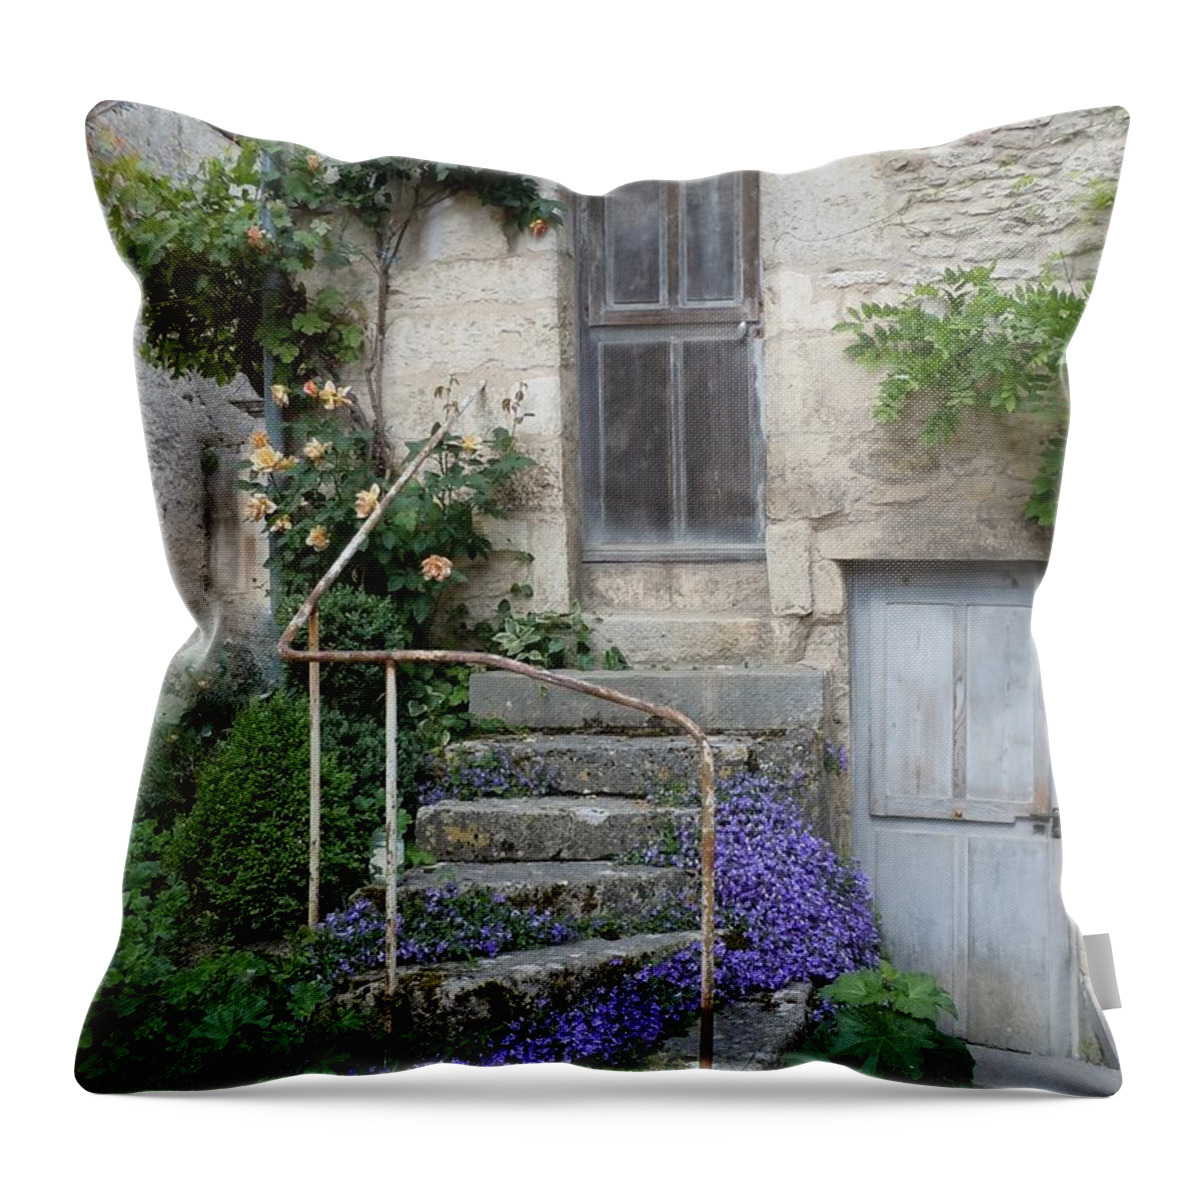 Europe Throw Pillow featuring the photograph French Staircase With Flowers by Marilyn Dunlap